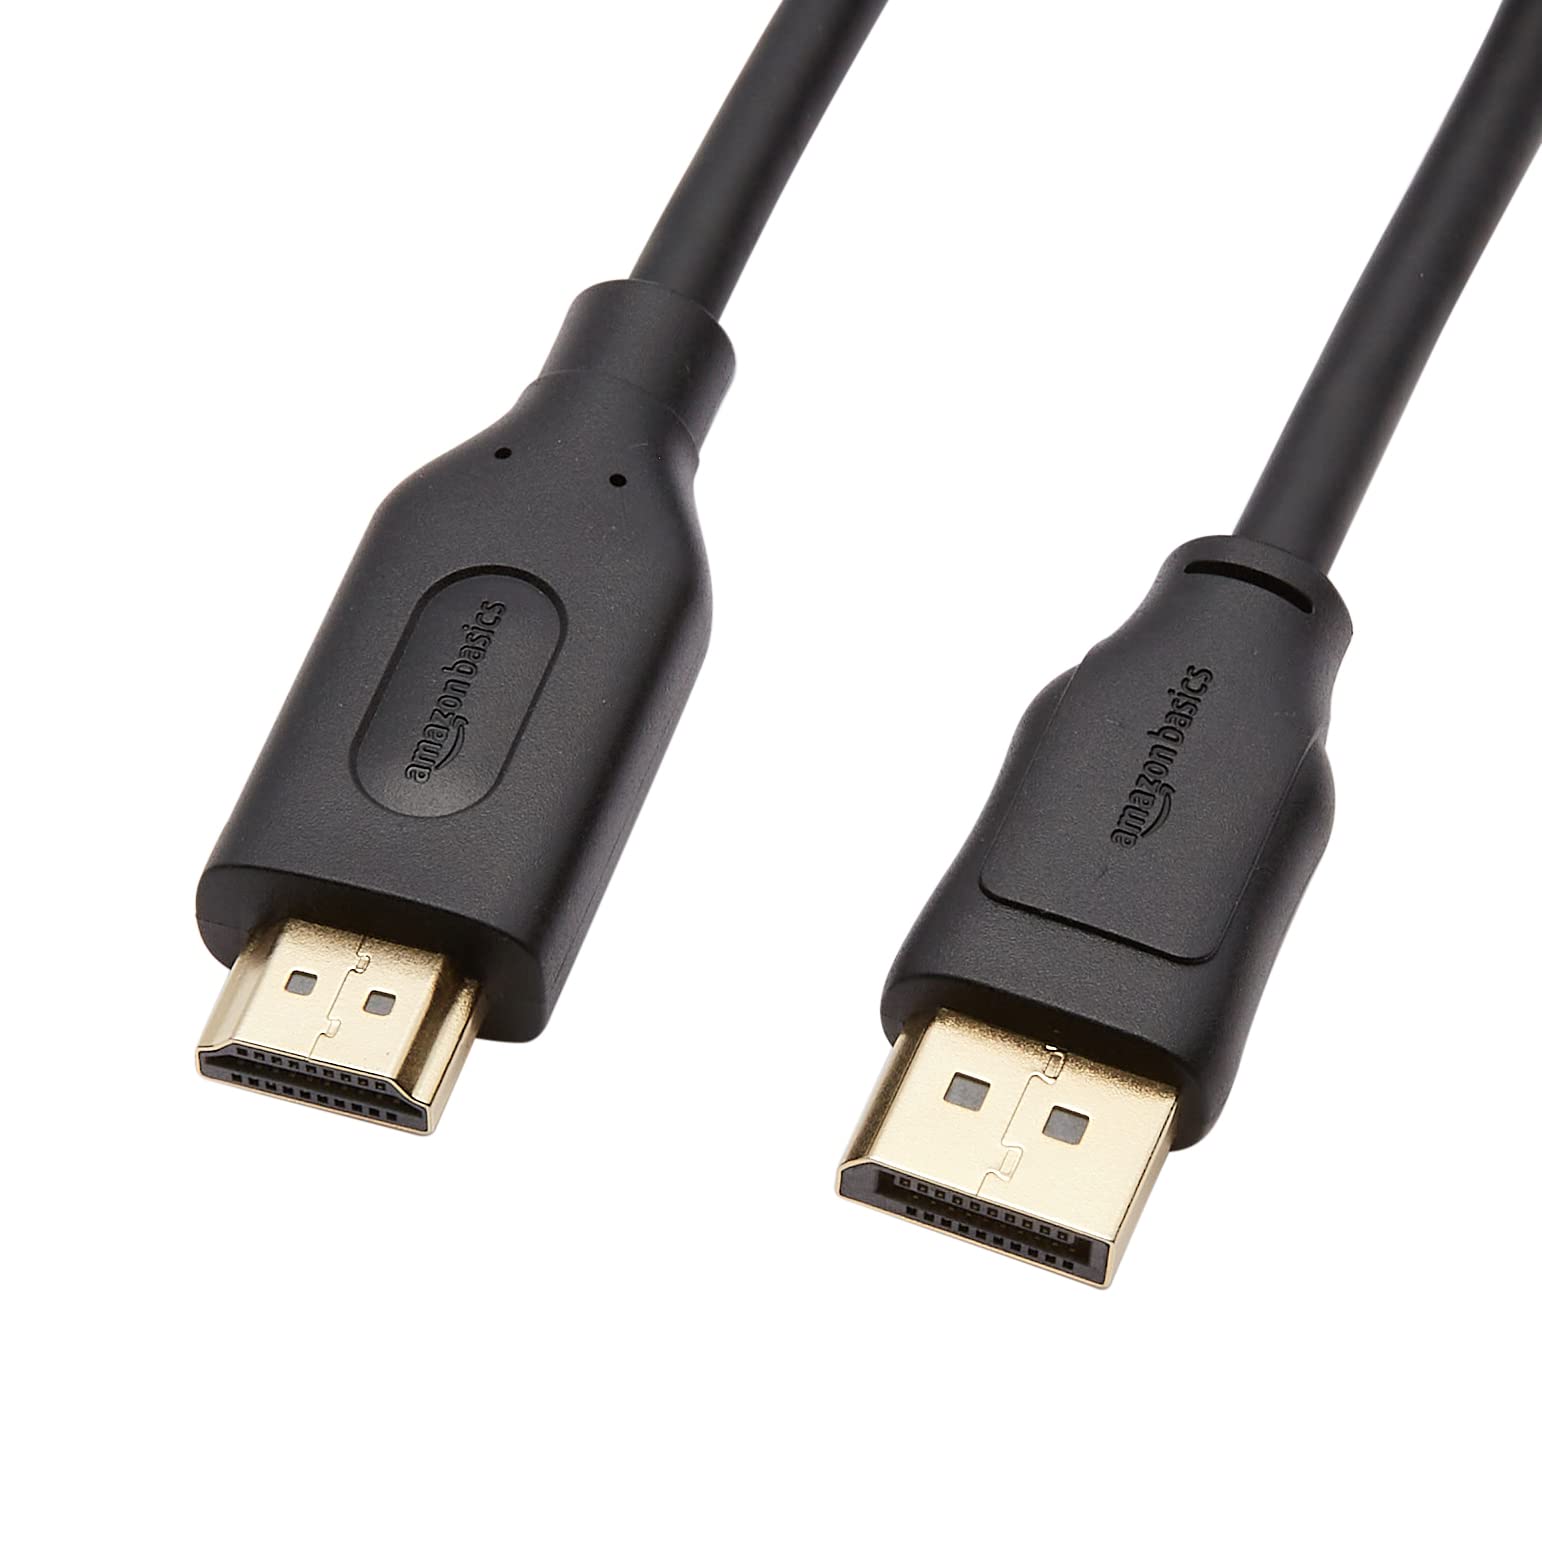 Amazon Basics DisplayPort to HDMI Display Cable, Uni-Directional, 4k@30Hz, 1920x1200, 1080p, Gold-Plated Plugs, 6 Foot, Black